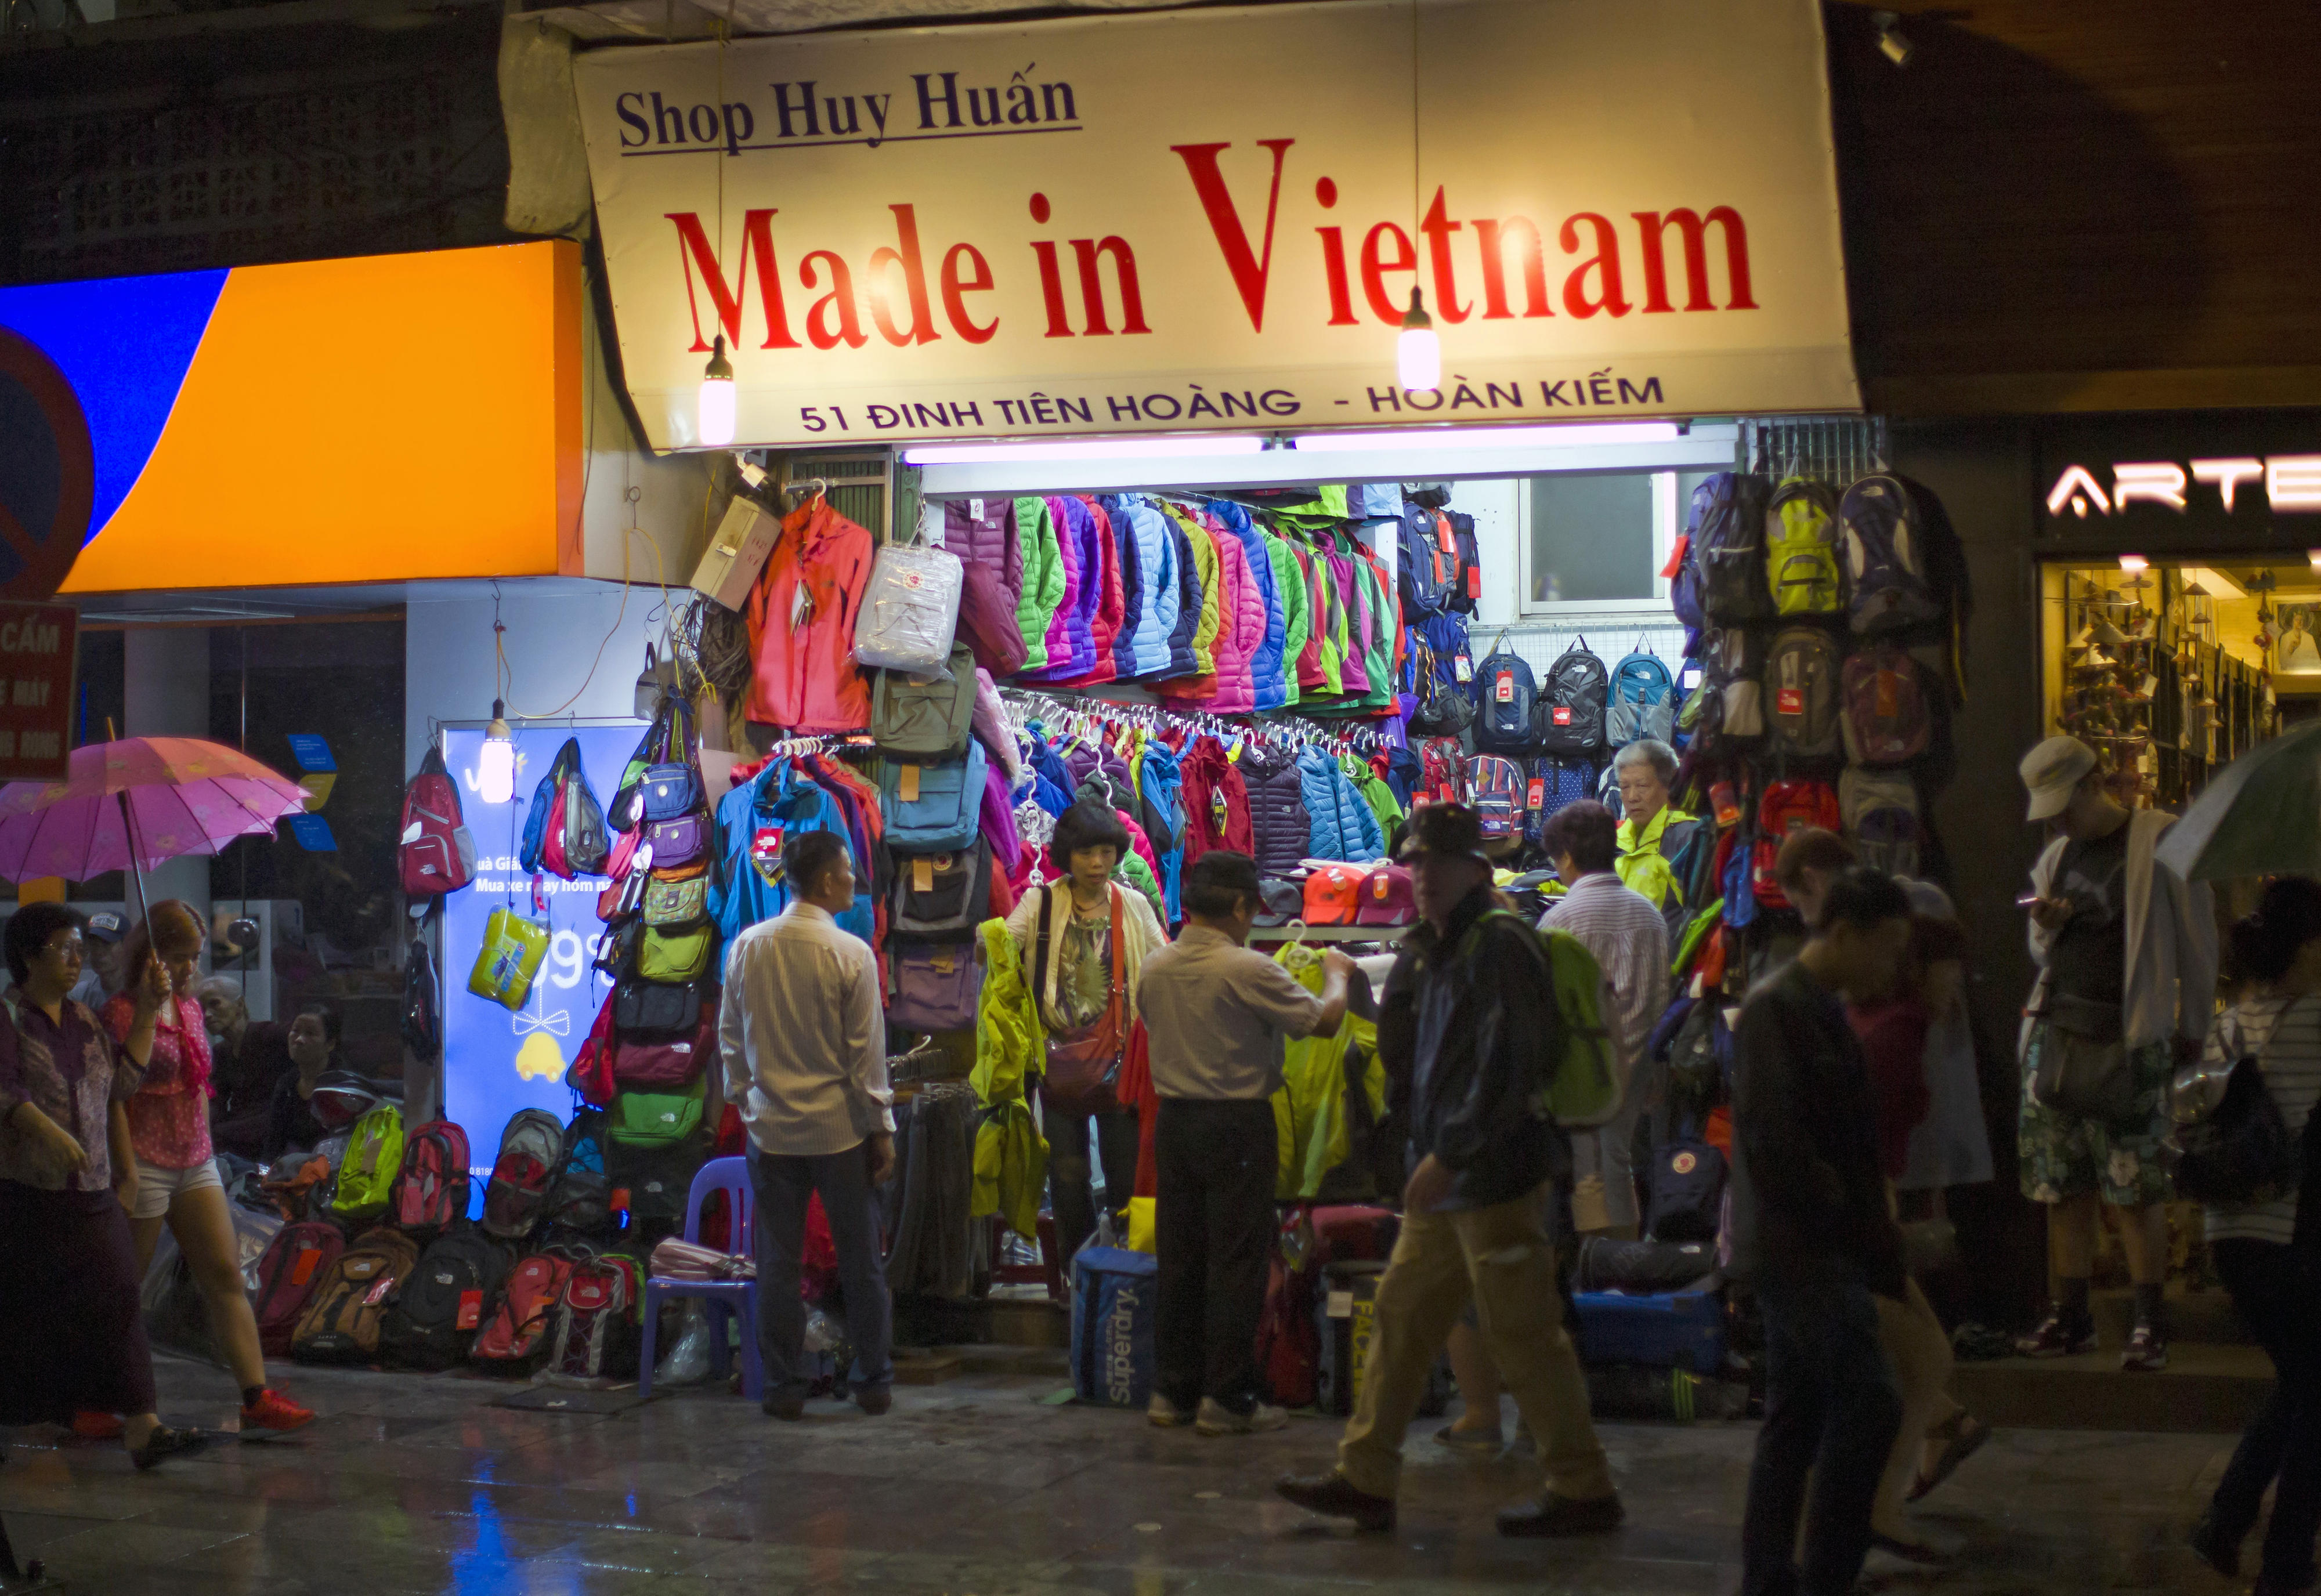 A shopping street in Hanoi by night